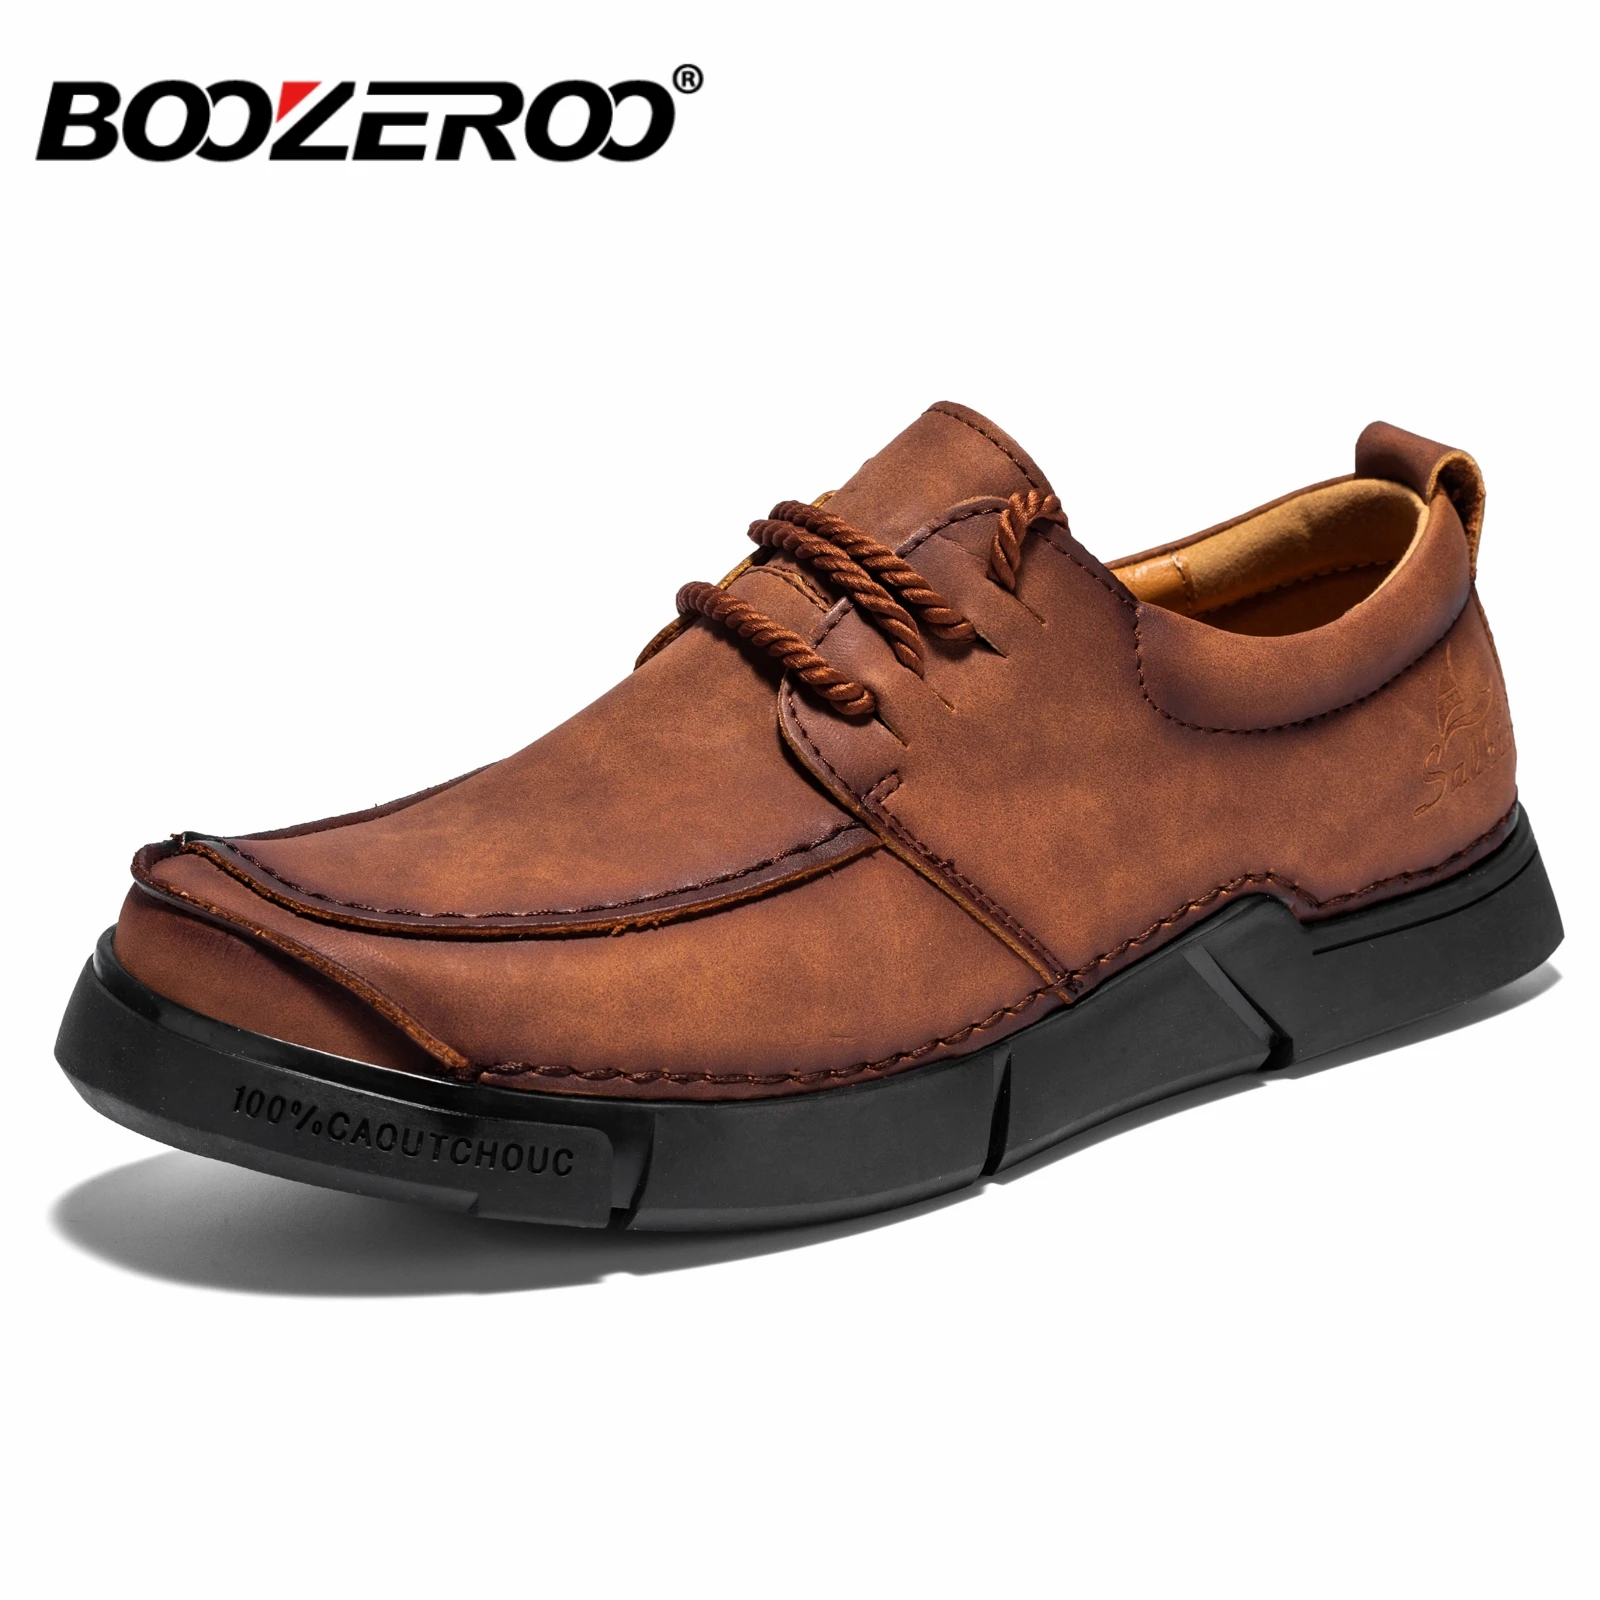 

BOOZEROO Men's Fashion Handmade Casual Shoes Non Slip Wear Resistant Leather Shoes Soft Loafers Breathable Business Shoes